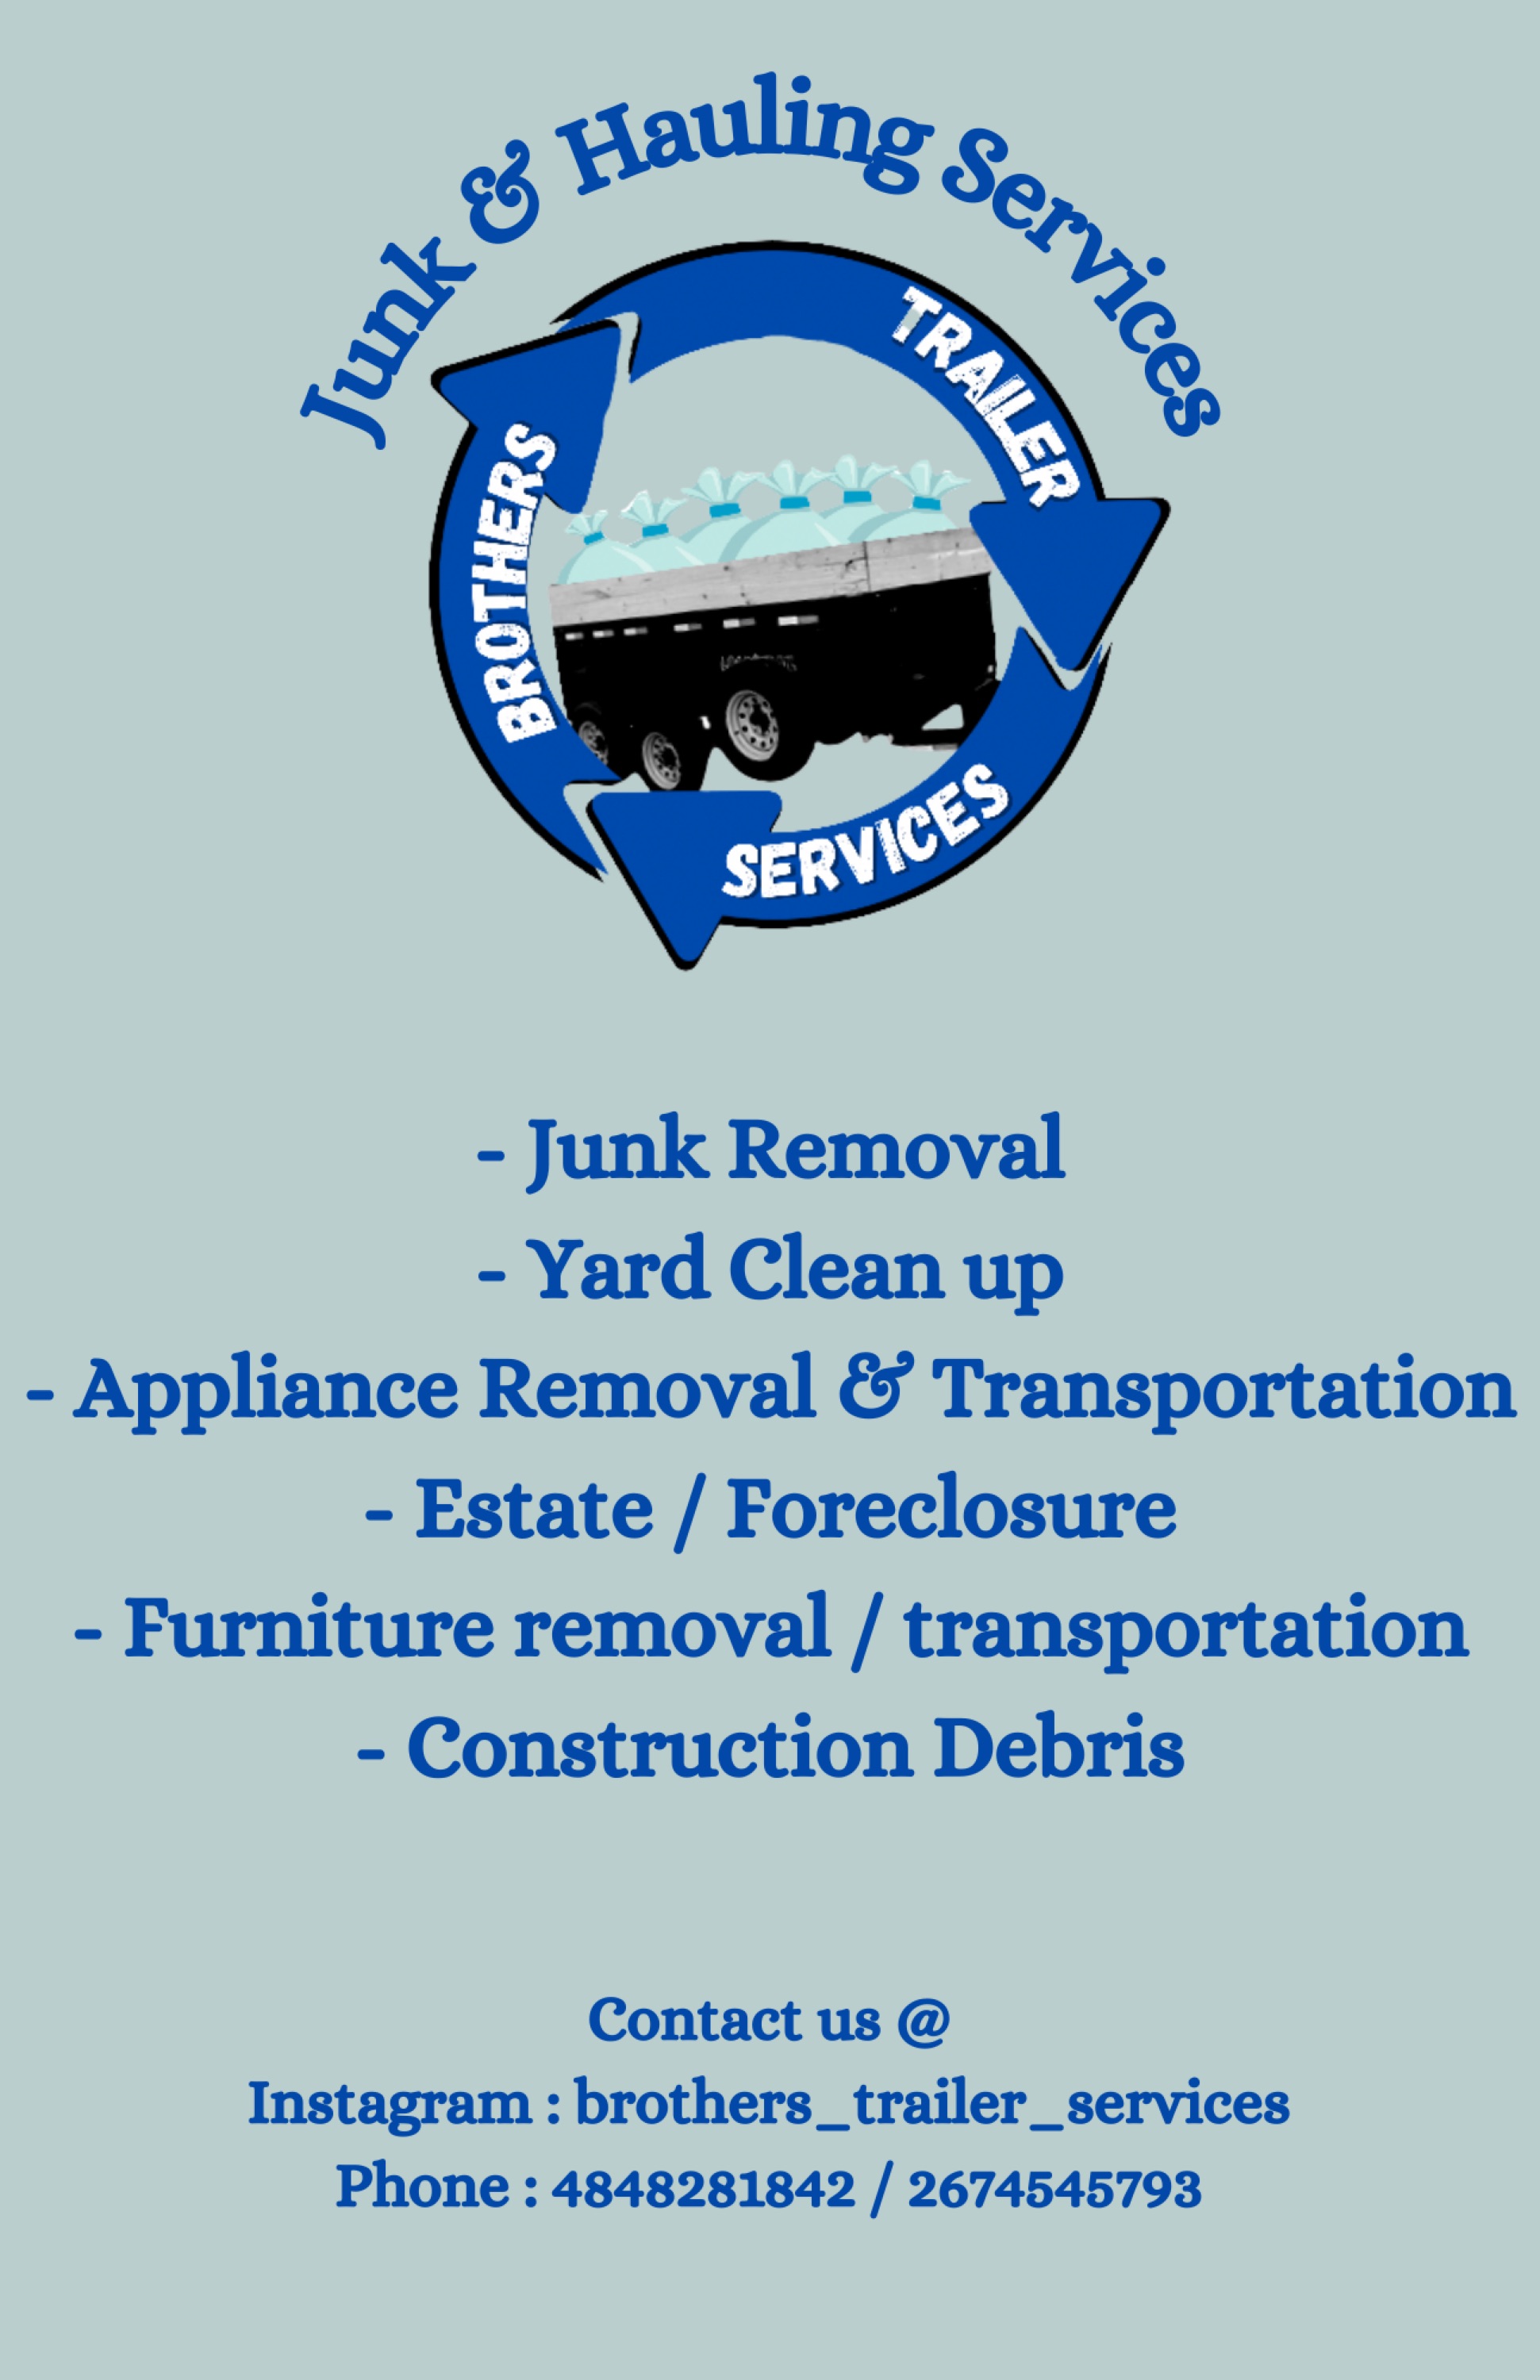 Brother Trailer Services Logo